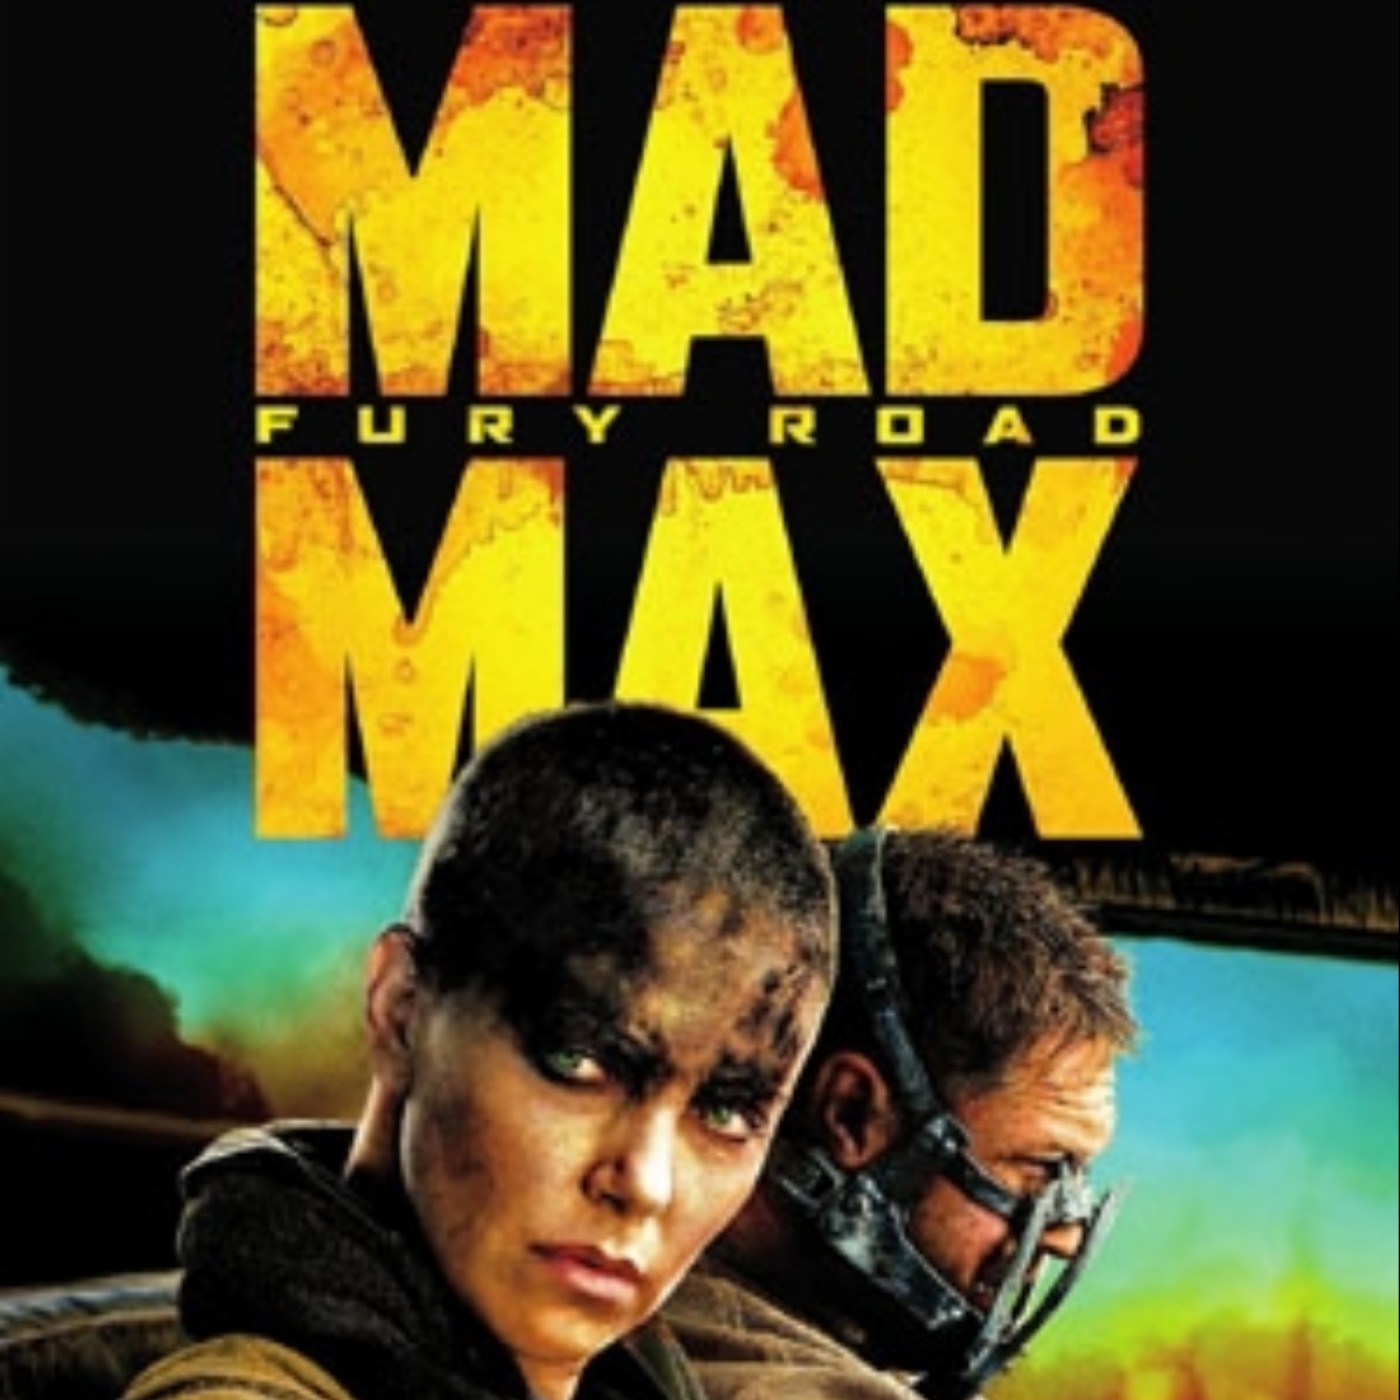 mad max fury road in hindi online